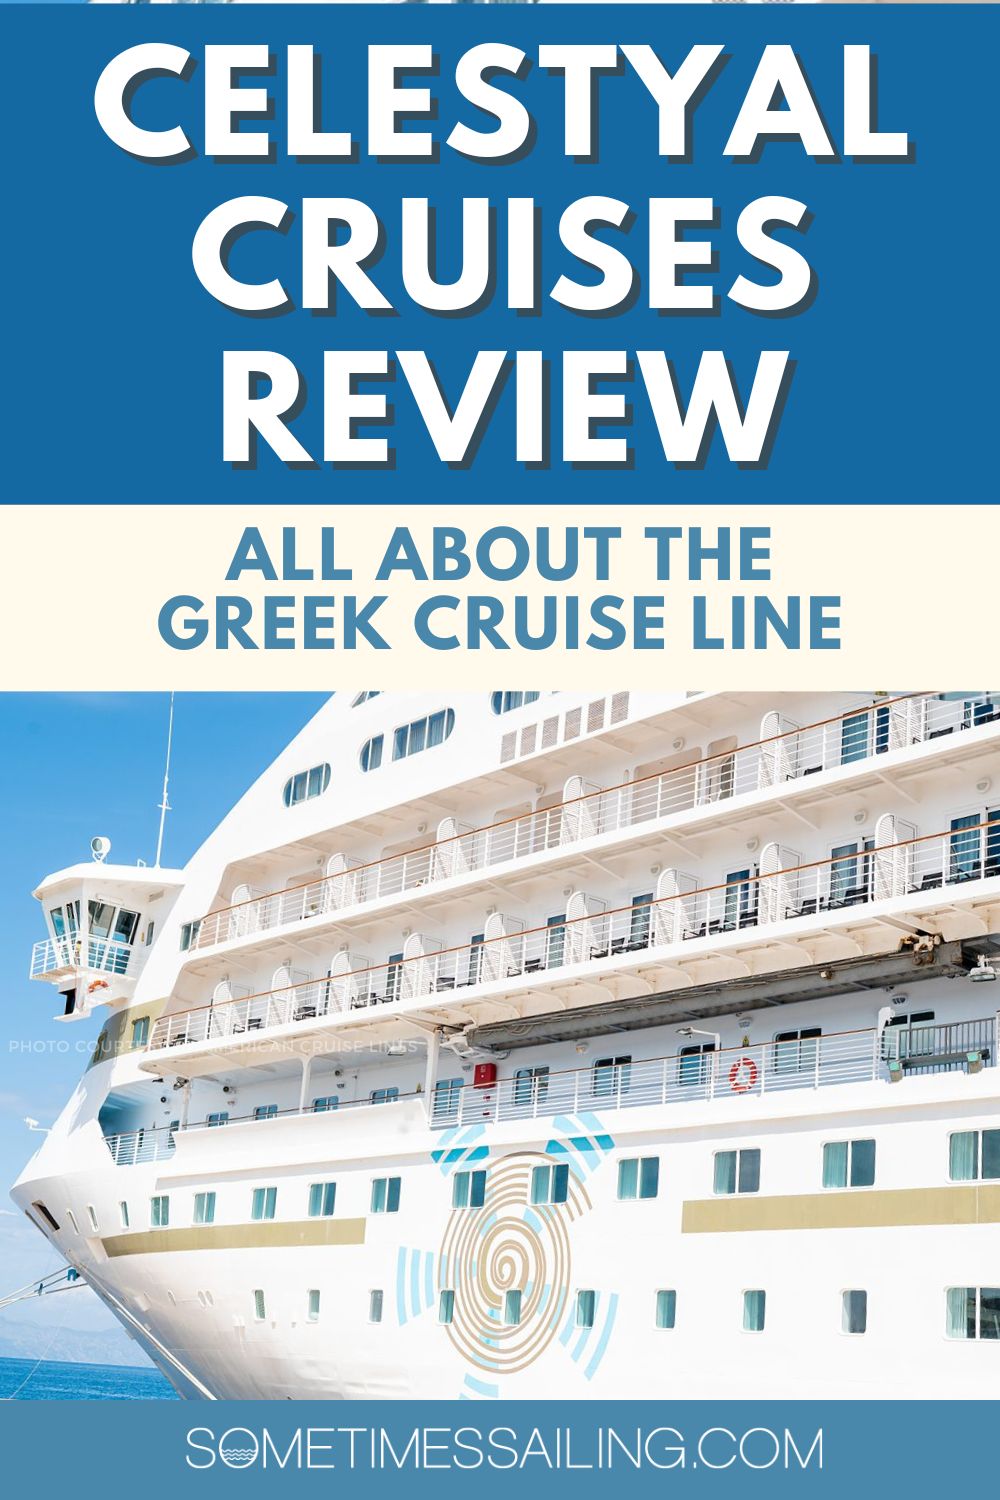 Celestyal Cruises Review: All About the Greek Cruise Line with a picture of the side of the cruise ship.